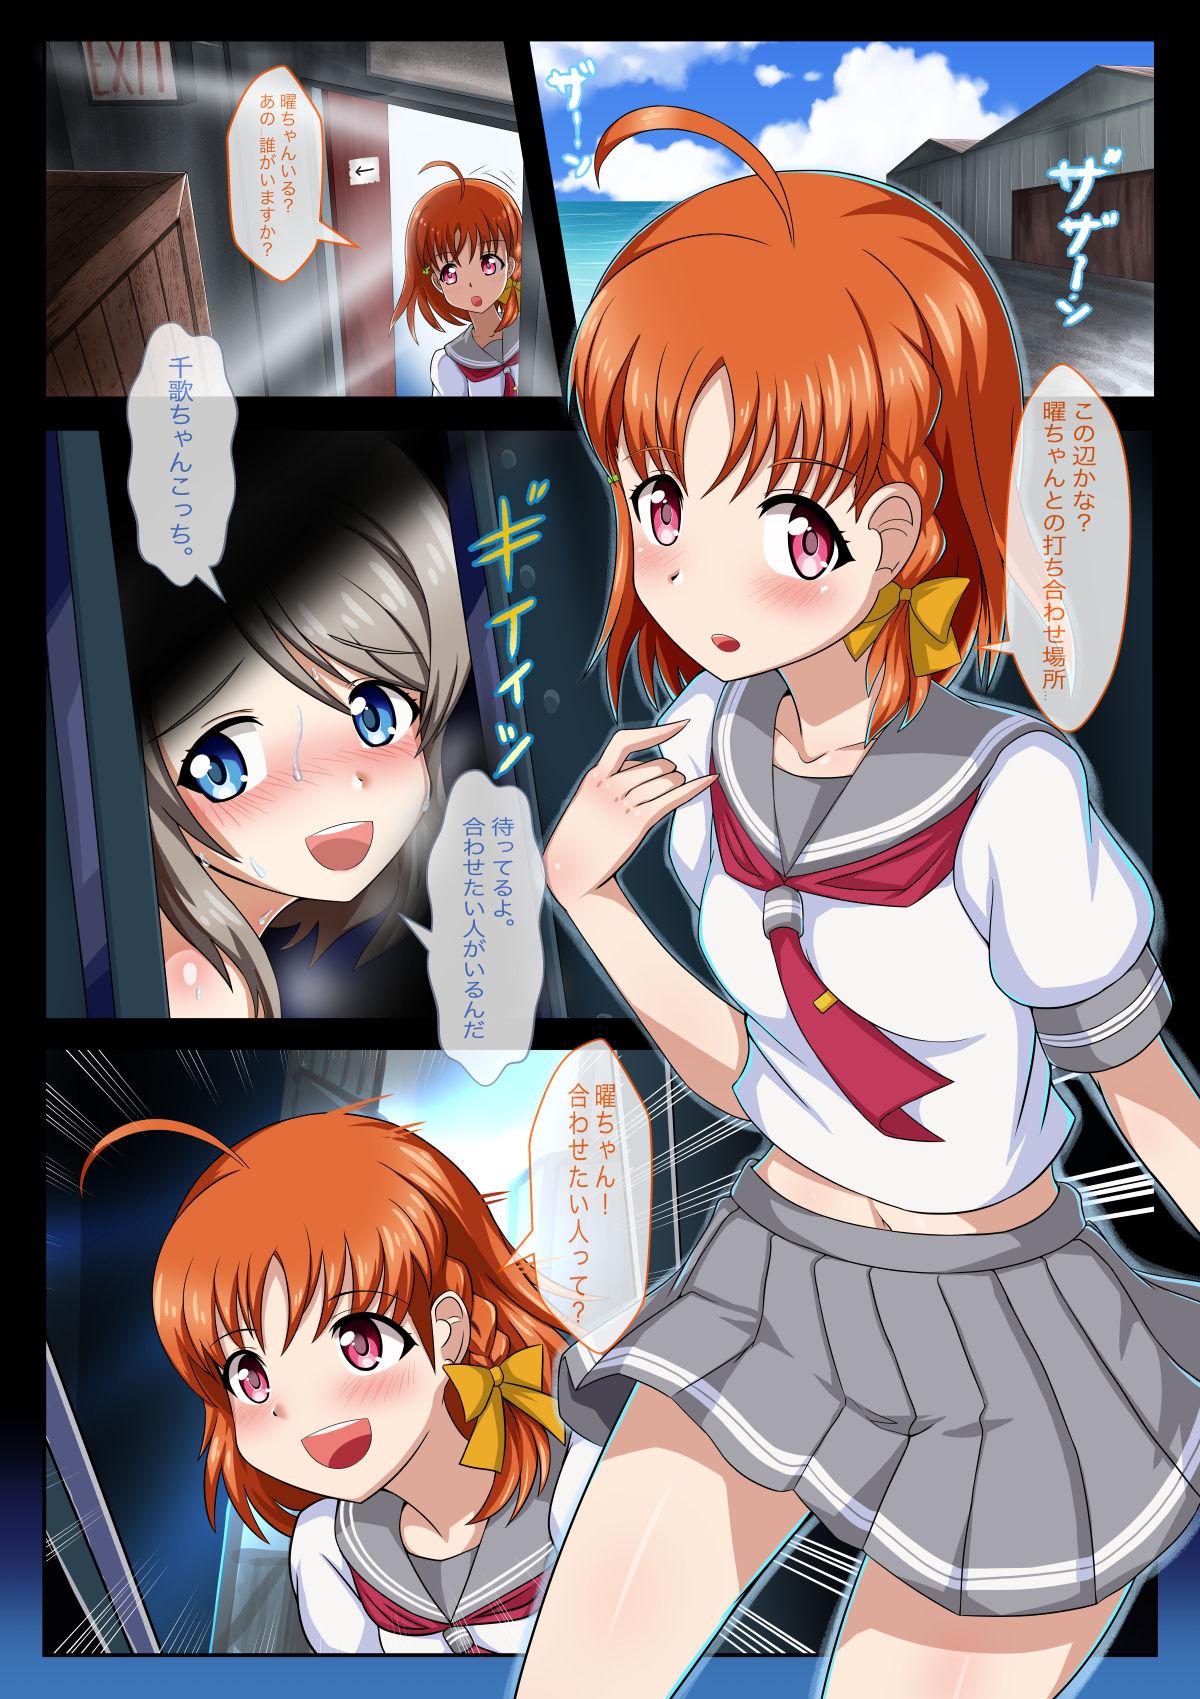 Gay Doctor Idol trainner 2 - Love live sunshine Gay Shaved - Page 2